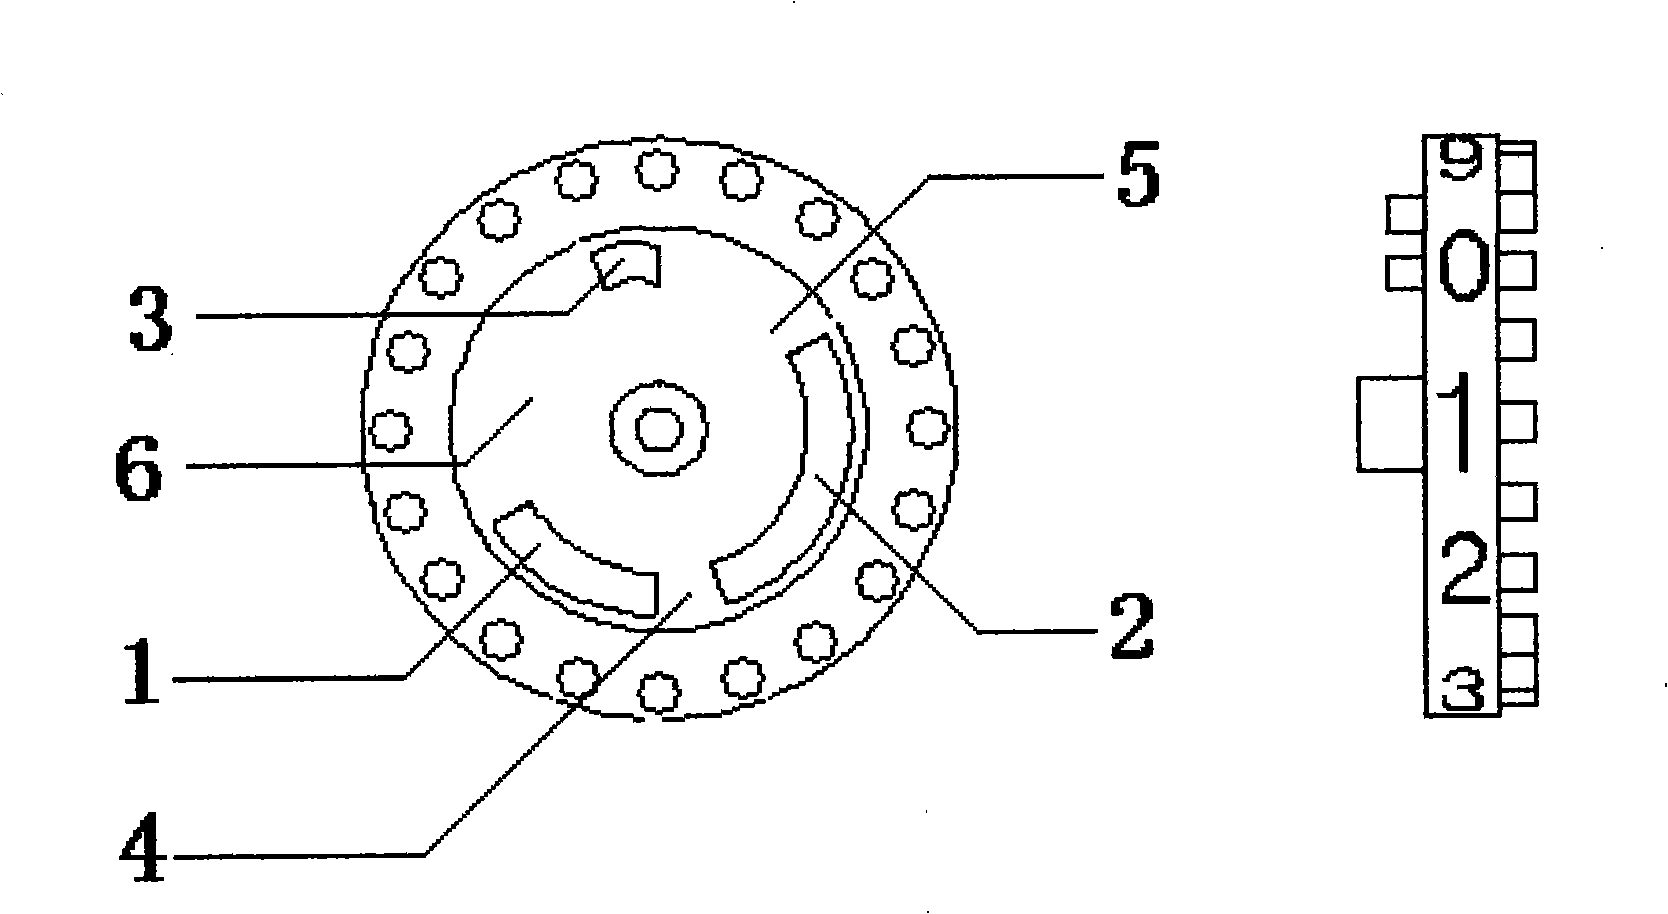 Encoding method for encoded word wheel of counter